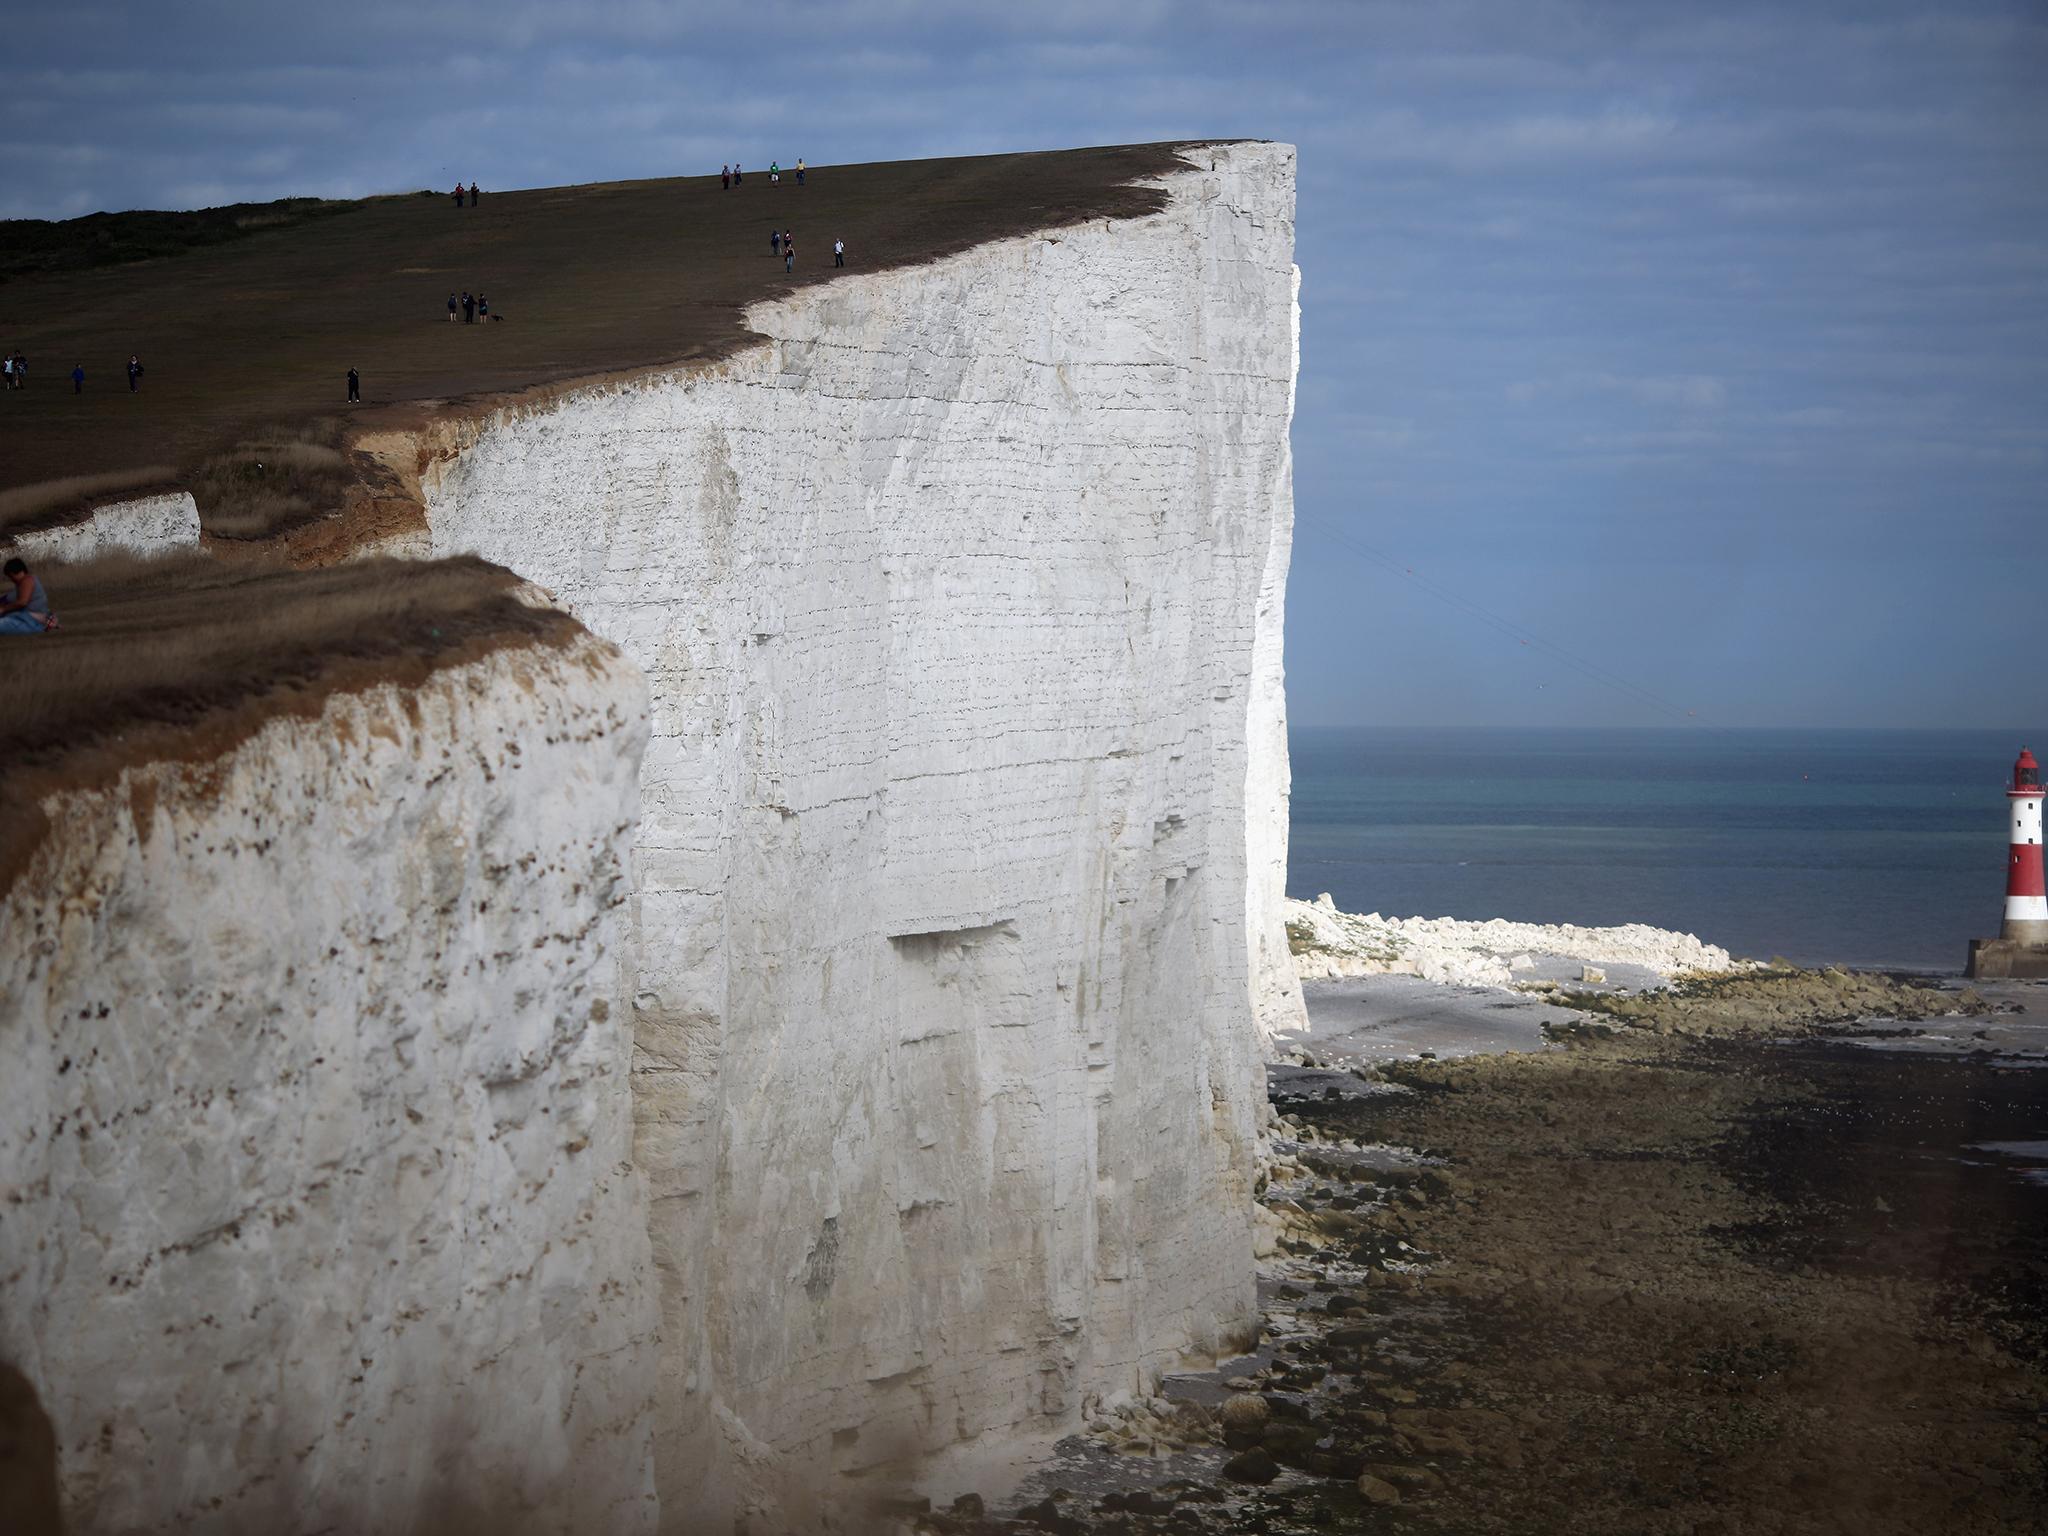 General view of the cliffs at Beachy Head